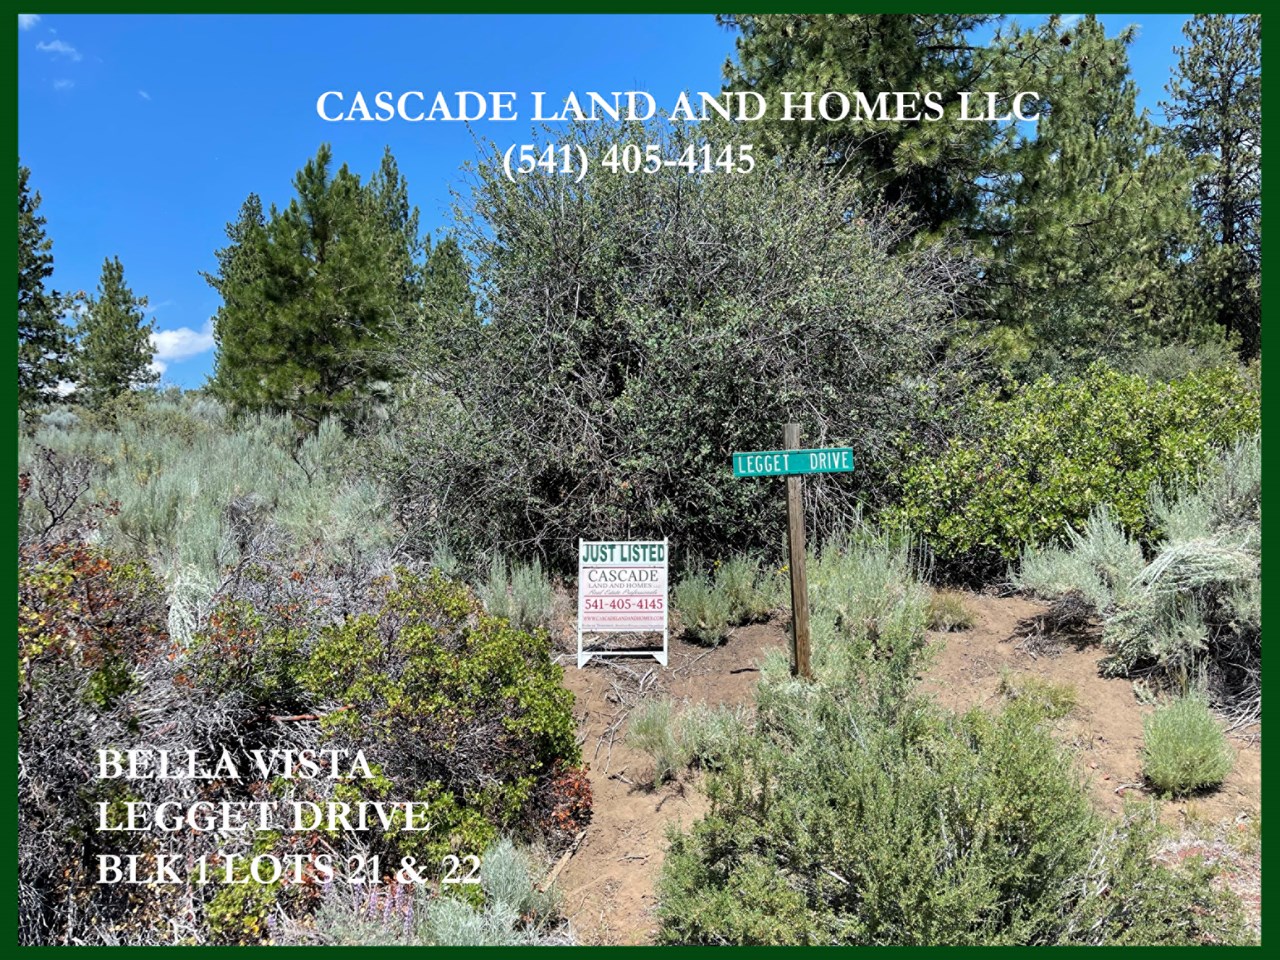 this is rare opportunity to purchase two adjoining lots! they are being sold together and offer a chance to build your new home on a large property with views of agency lake!